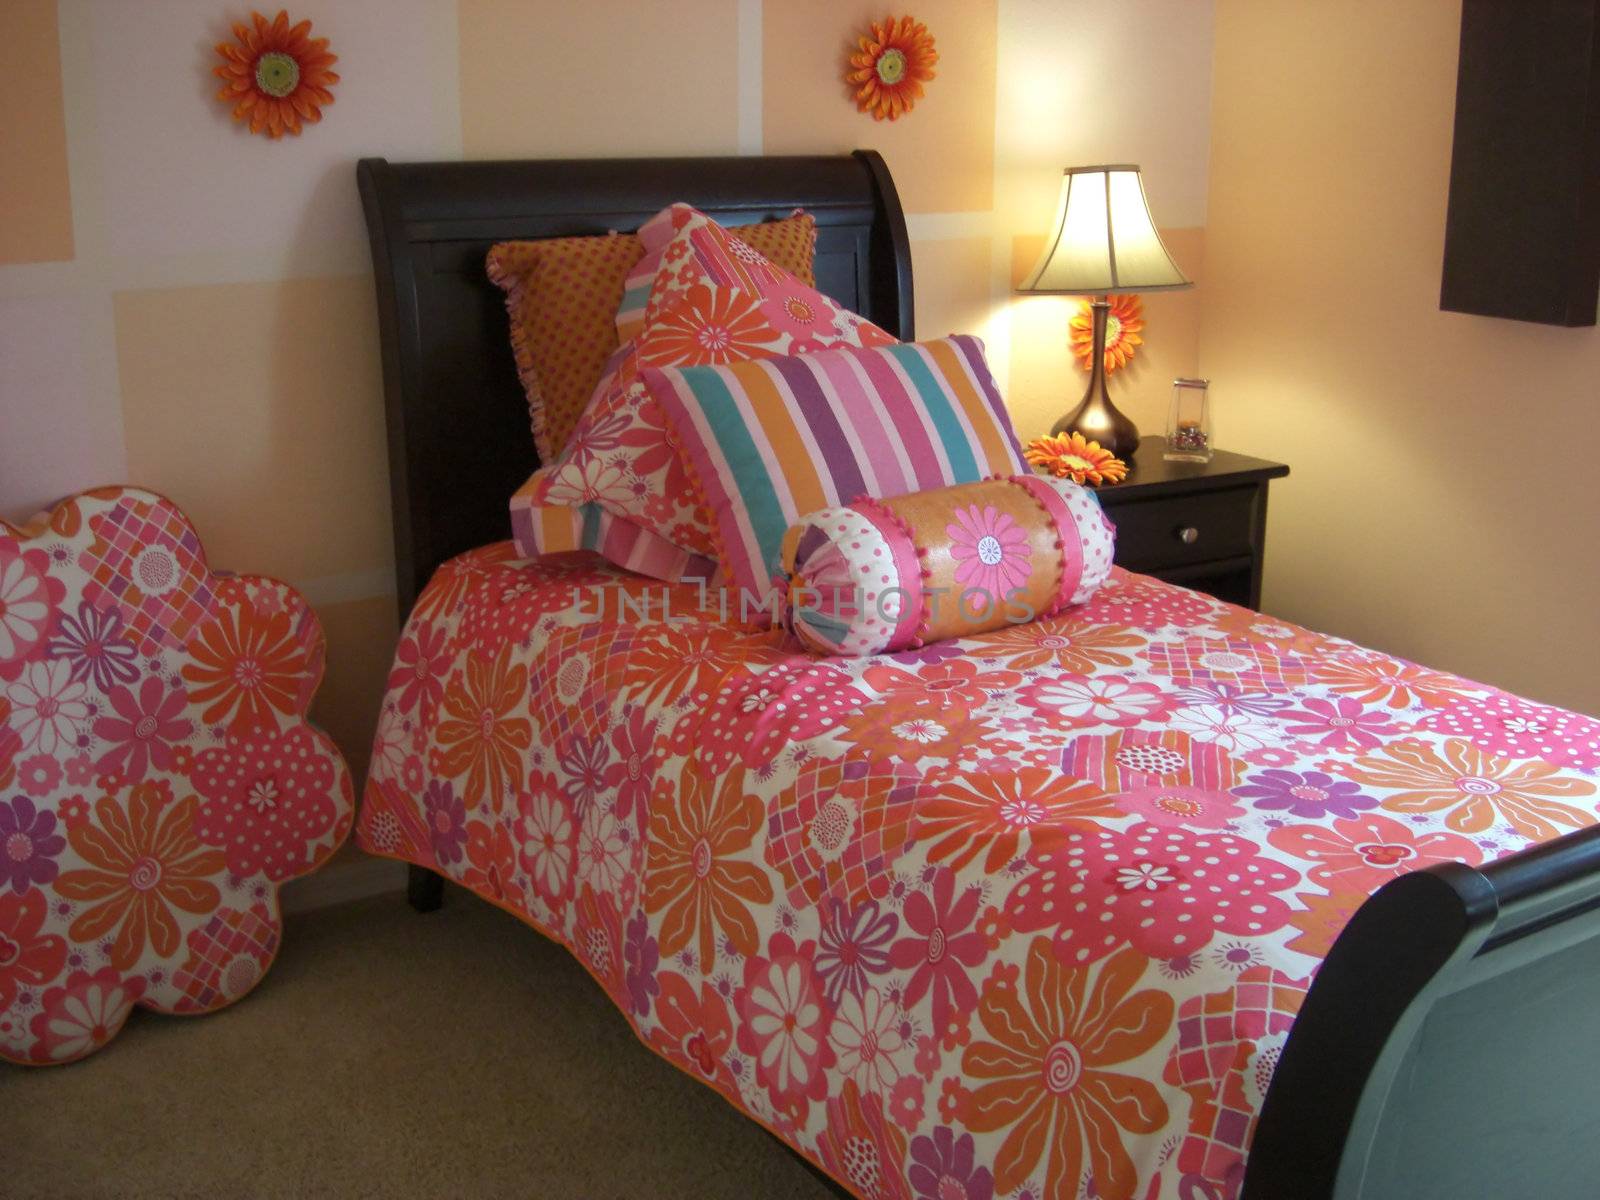 A bedroom is designed in a color coordination of pink.